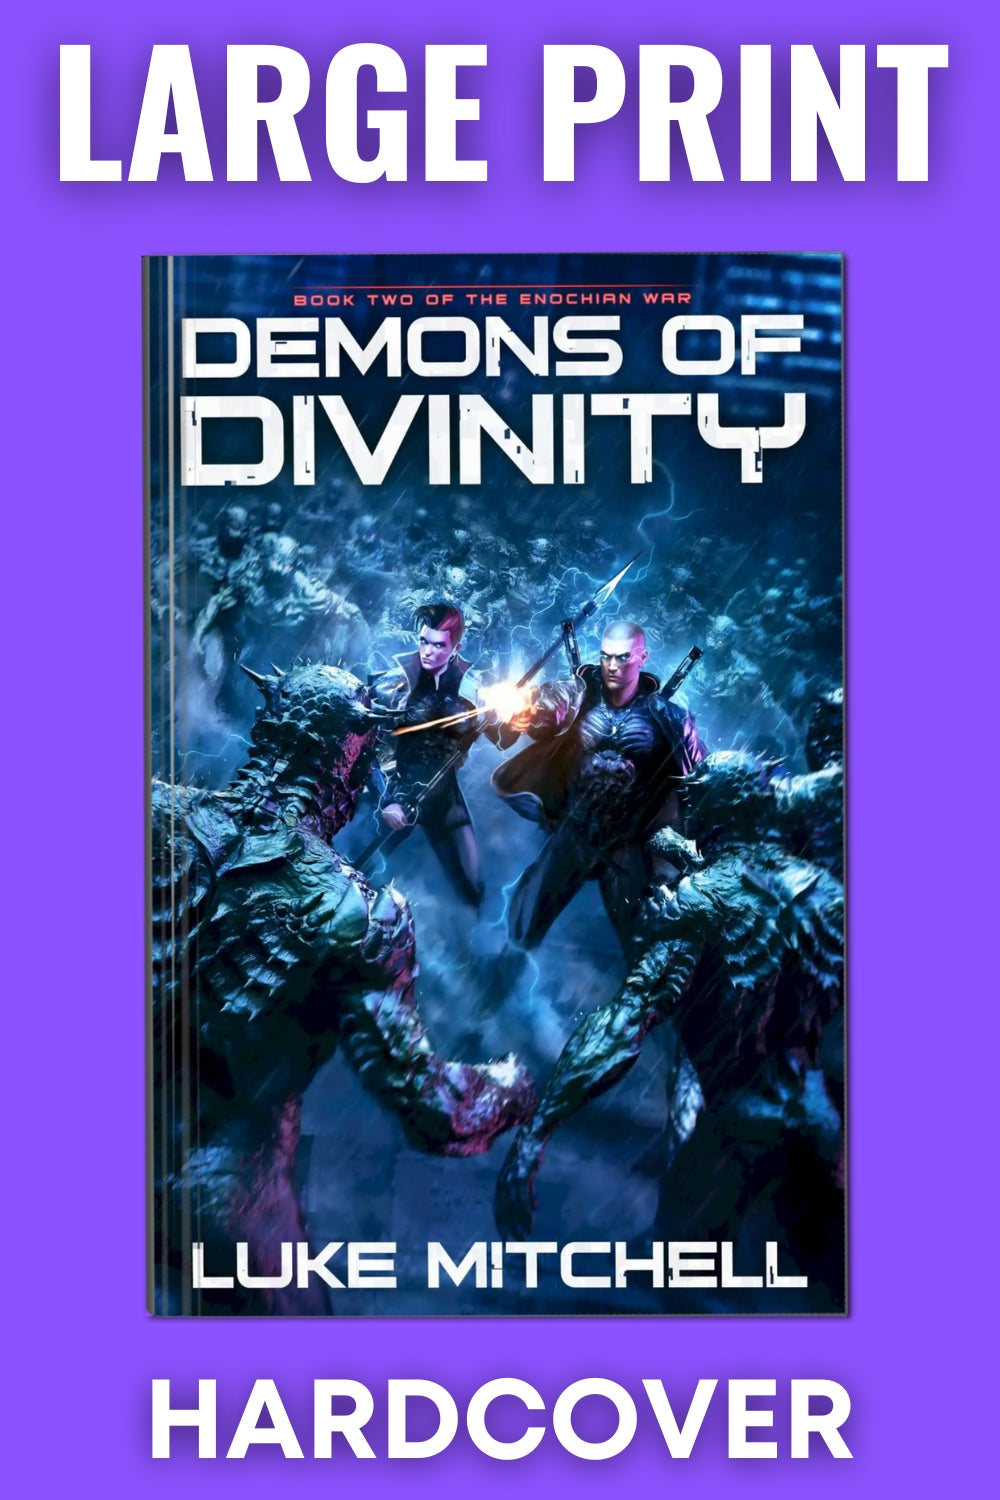 Demons of Divinity (Large Print Hardcover)